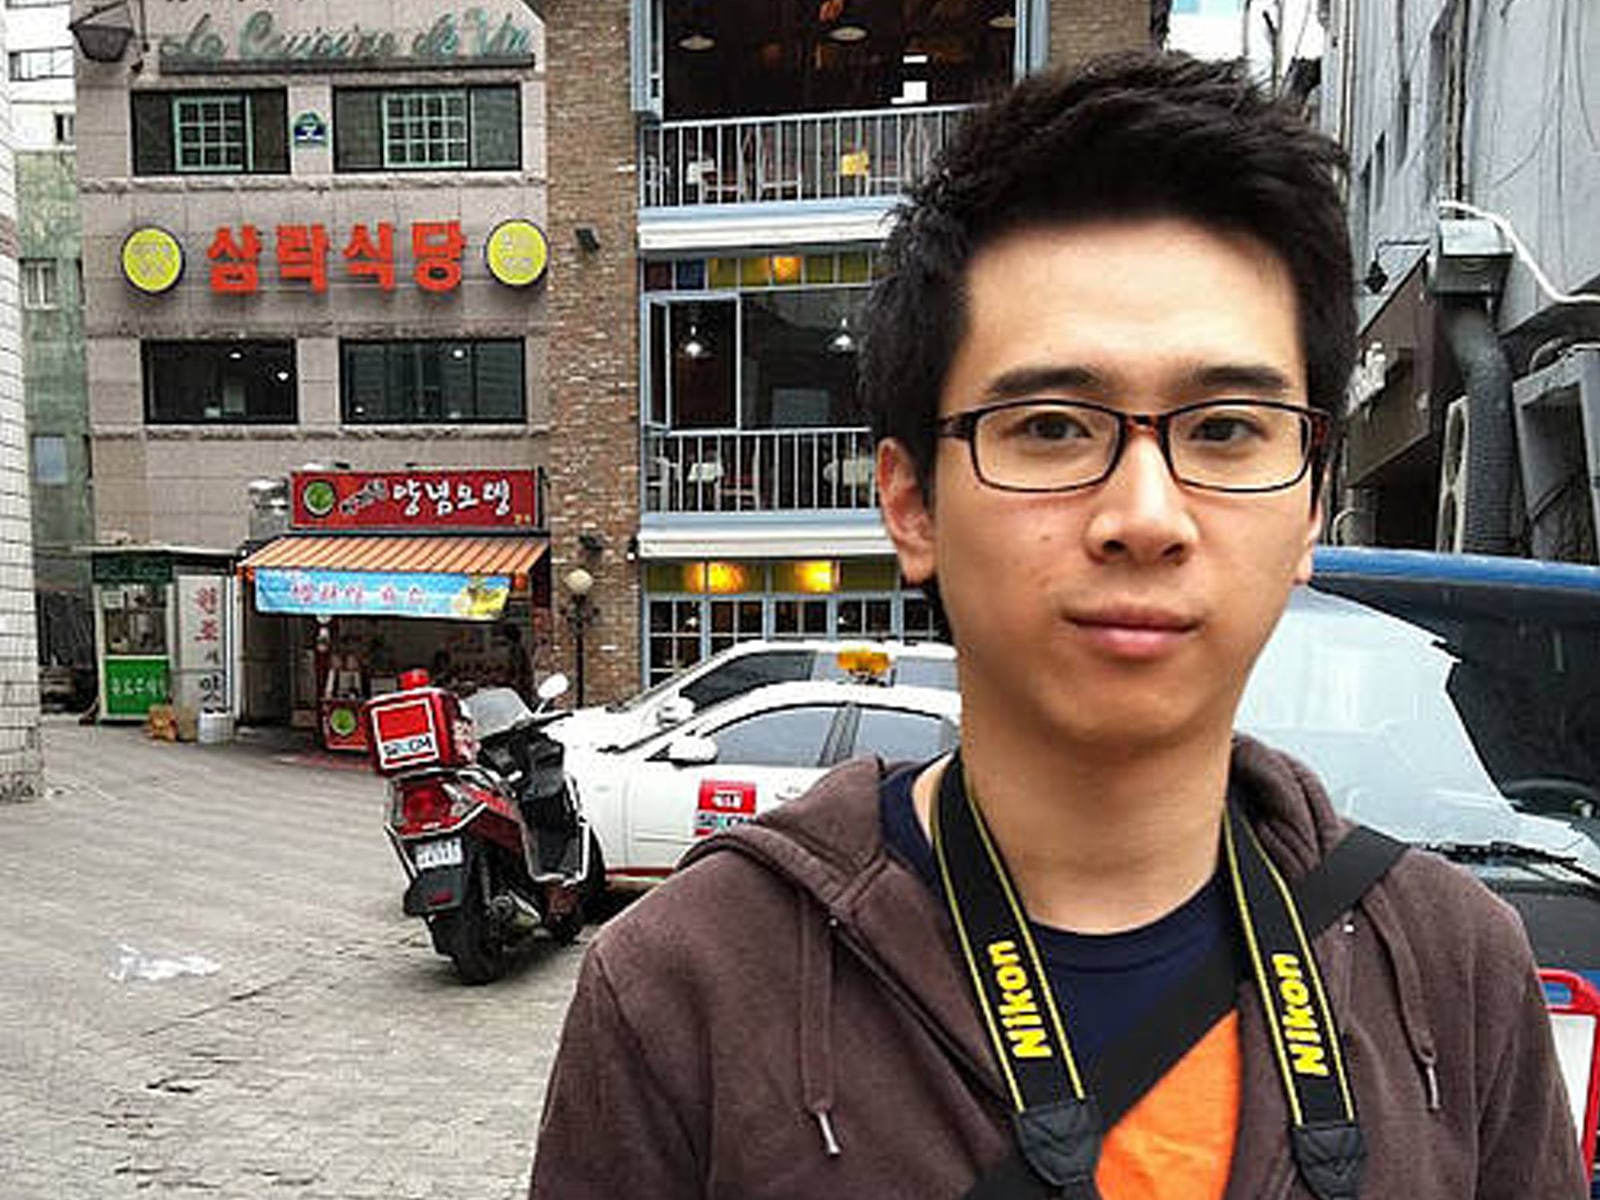 DigiPen alumnus David Ly posing in front of a Korean storefront